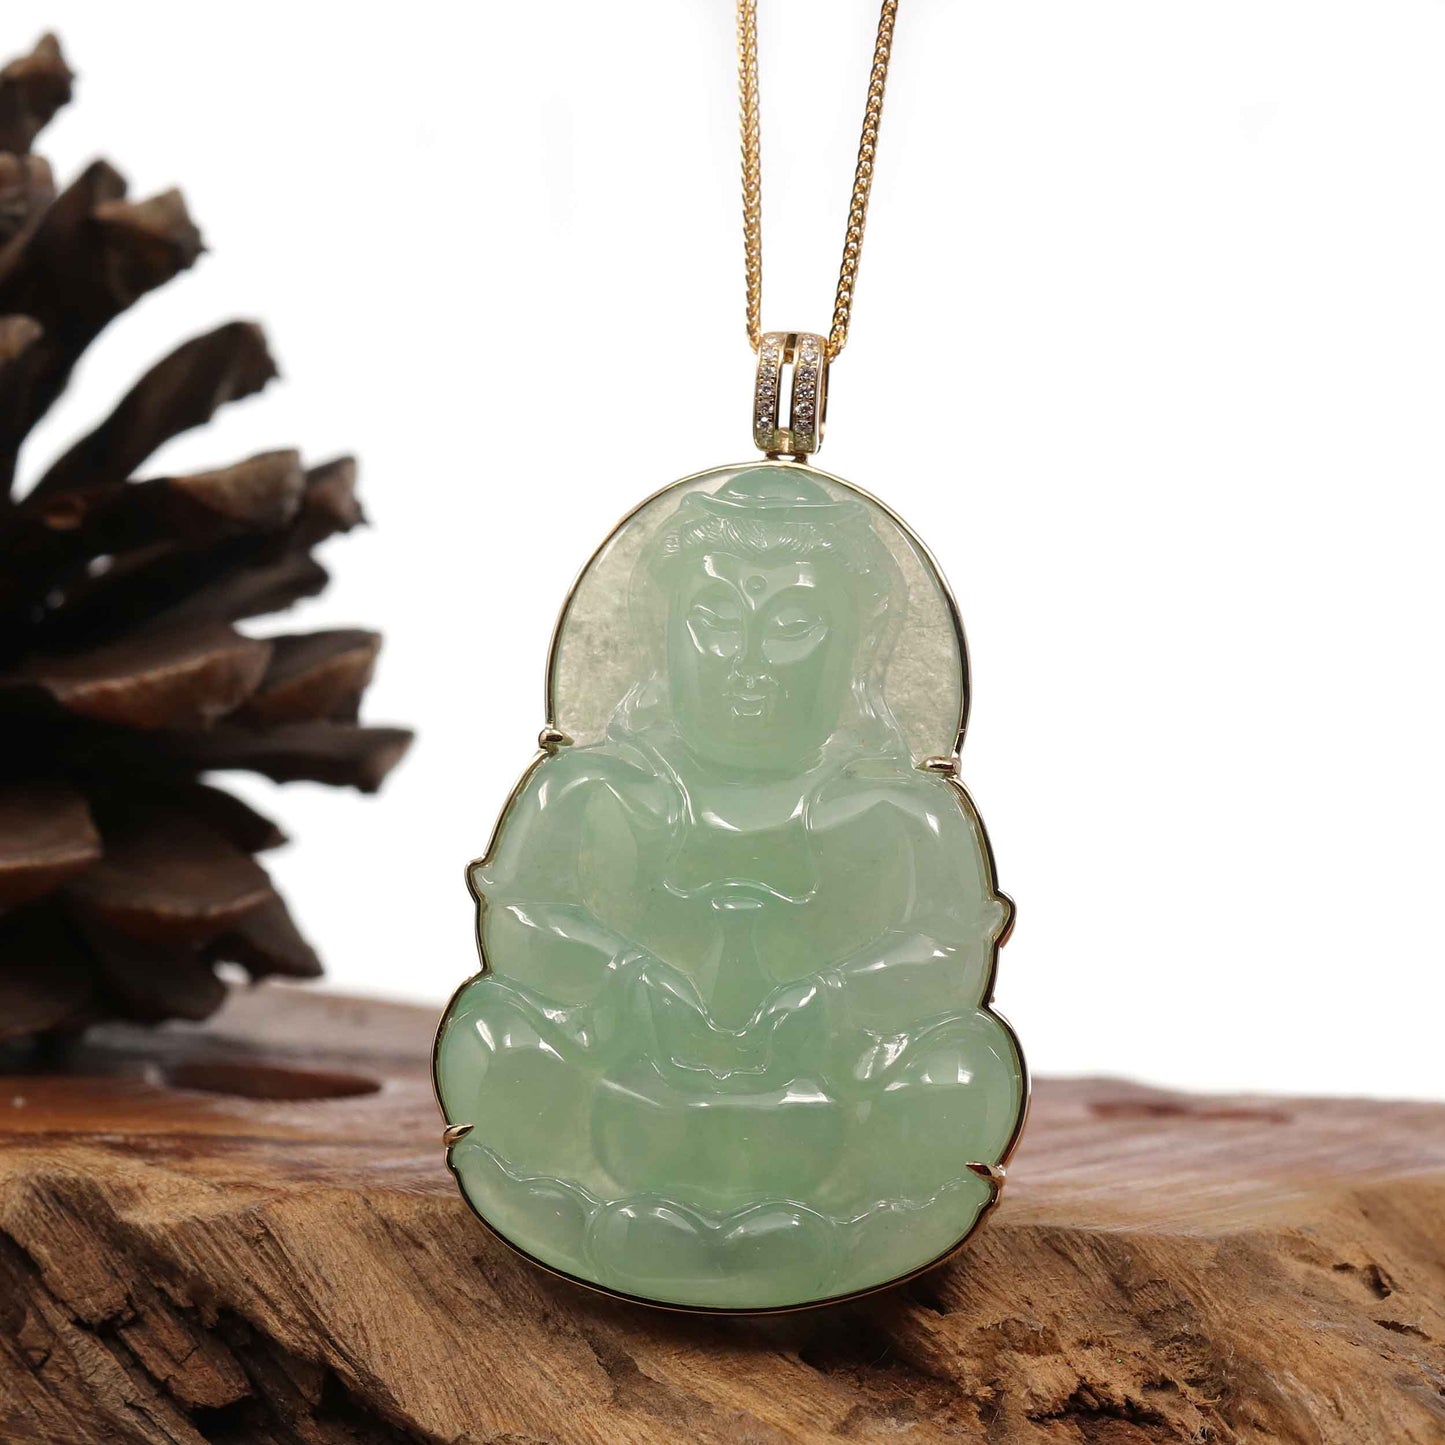 RealJade Co.¨ Jade Guanyin Pendant Necklace  "Goddess of Compassion" 14k Yellow Gold Genuine Burmese Jadeite Jade Guanyin Necklace With Good Luck Design